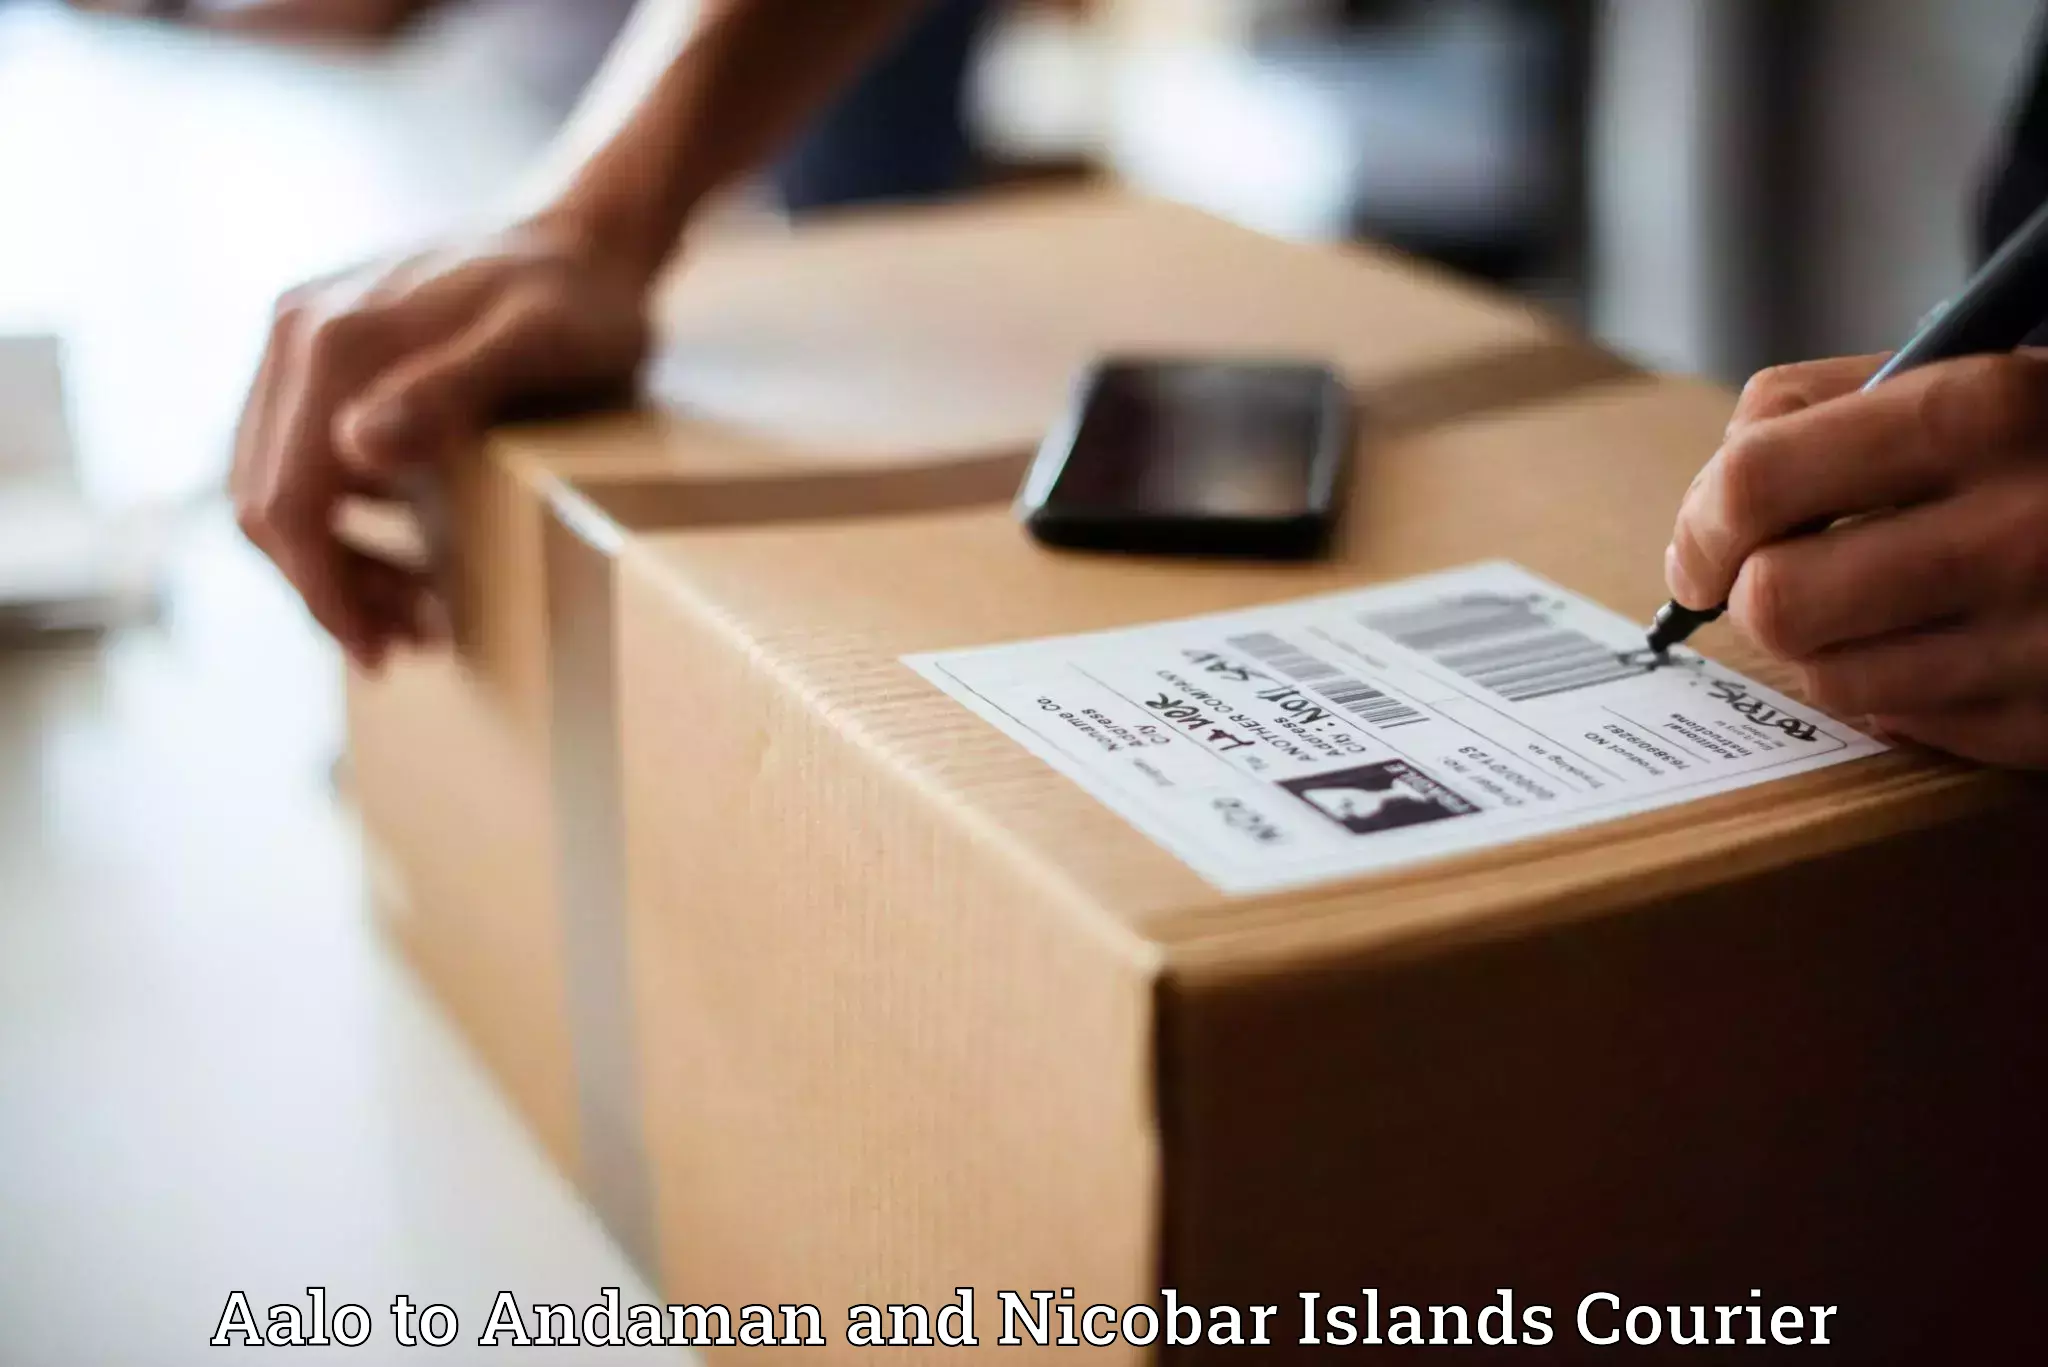 Digital courier platforms Aalo to South Andaman